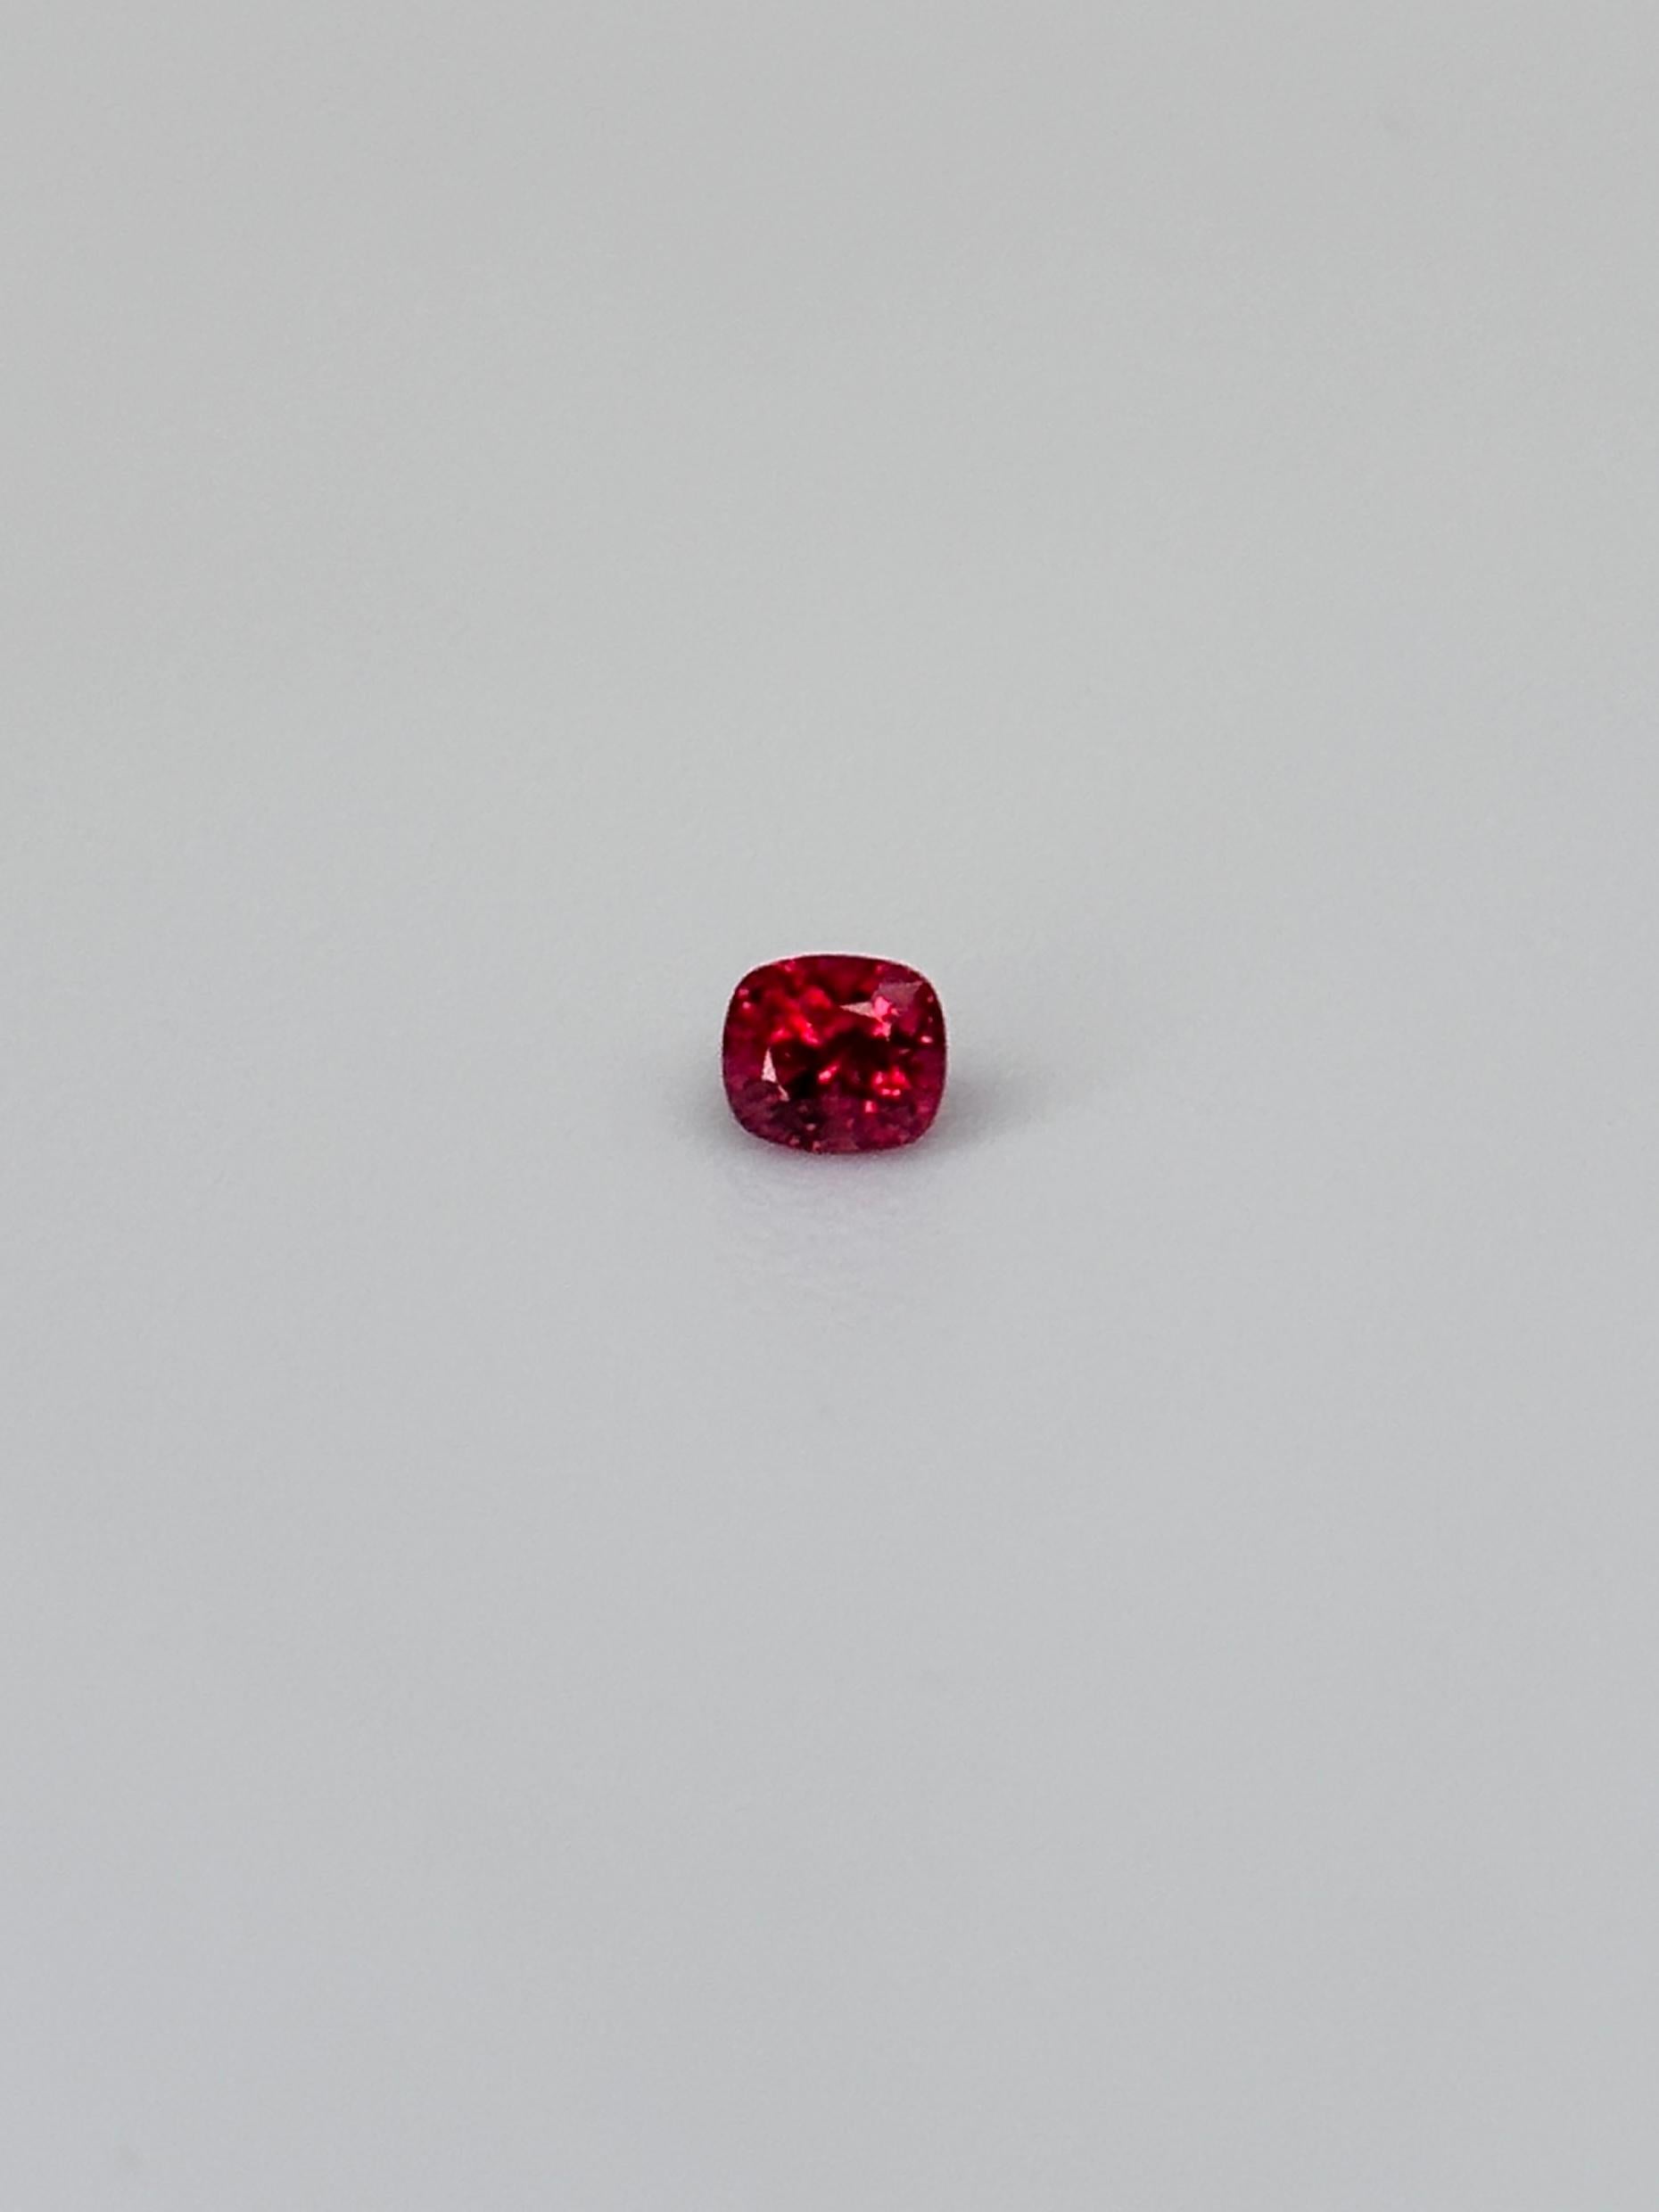 Myanmar, formerly known as Burma, is home these coveted gems known for their auspicious red and pink colors. Due to the strength and intensity of the colors, spinels from this area could be considered 
some of the most sought out in the entire